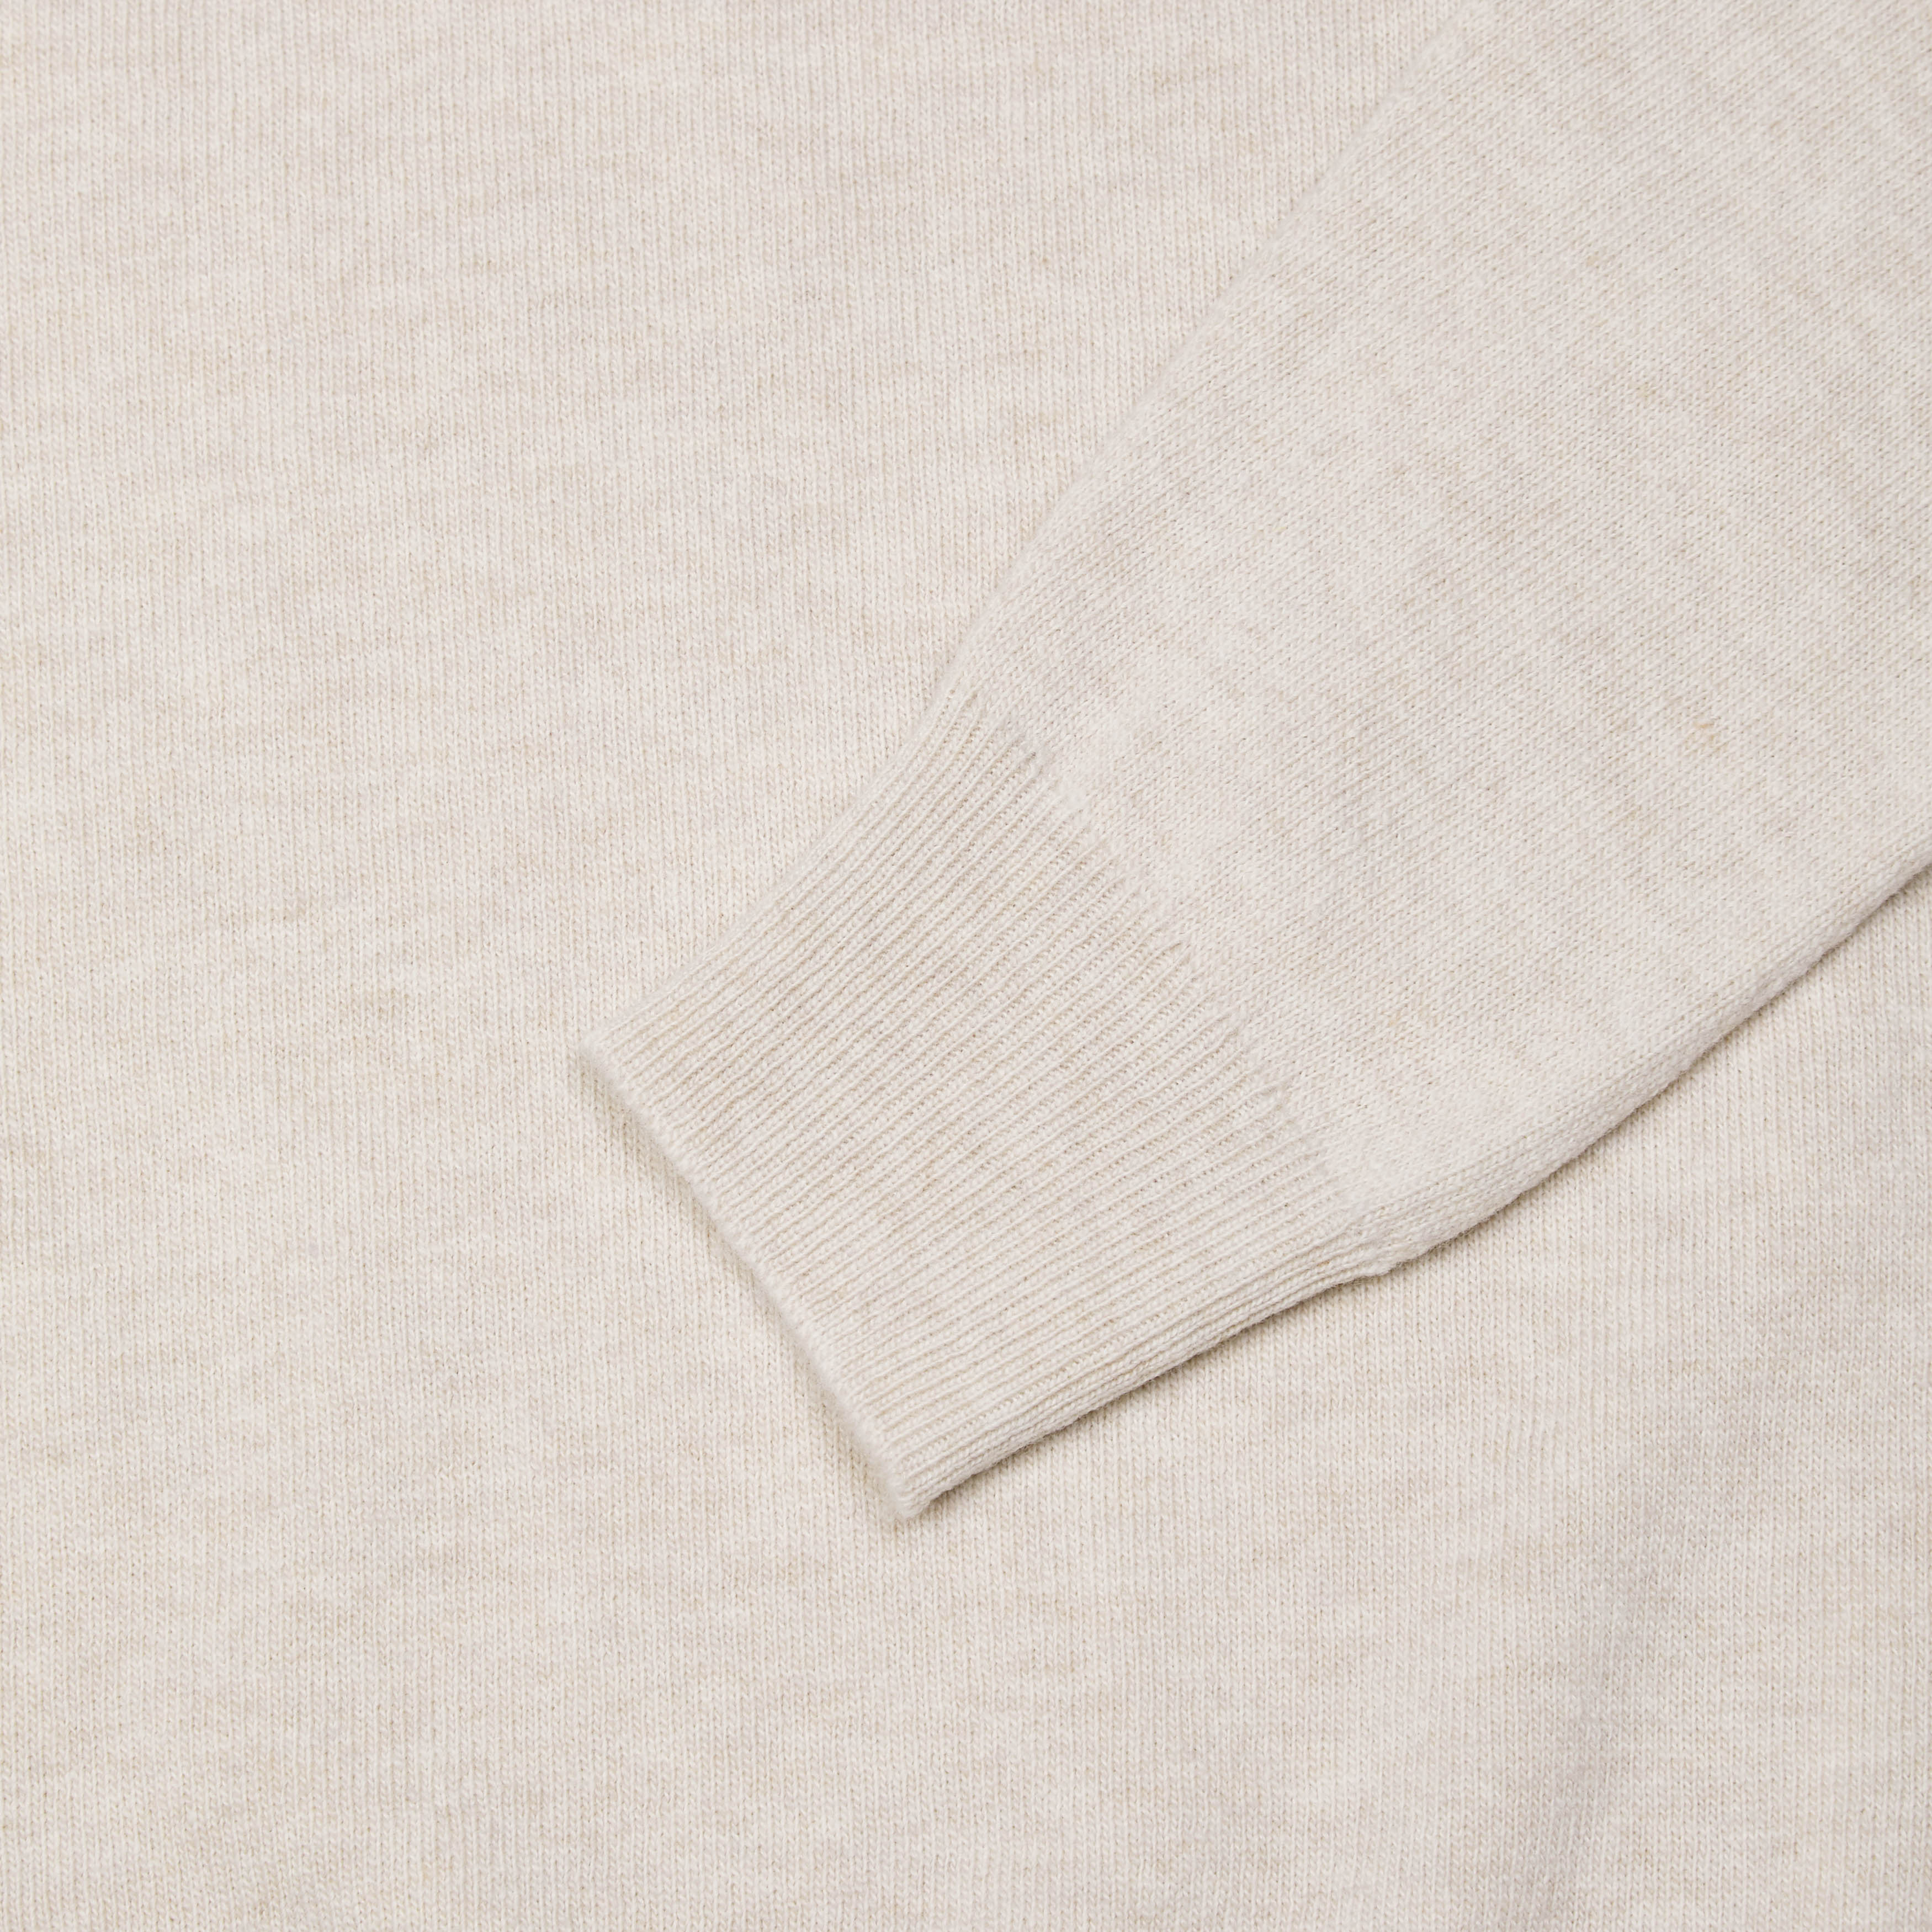 Superfine lambswool mock neck in oatmeal - Colhay's